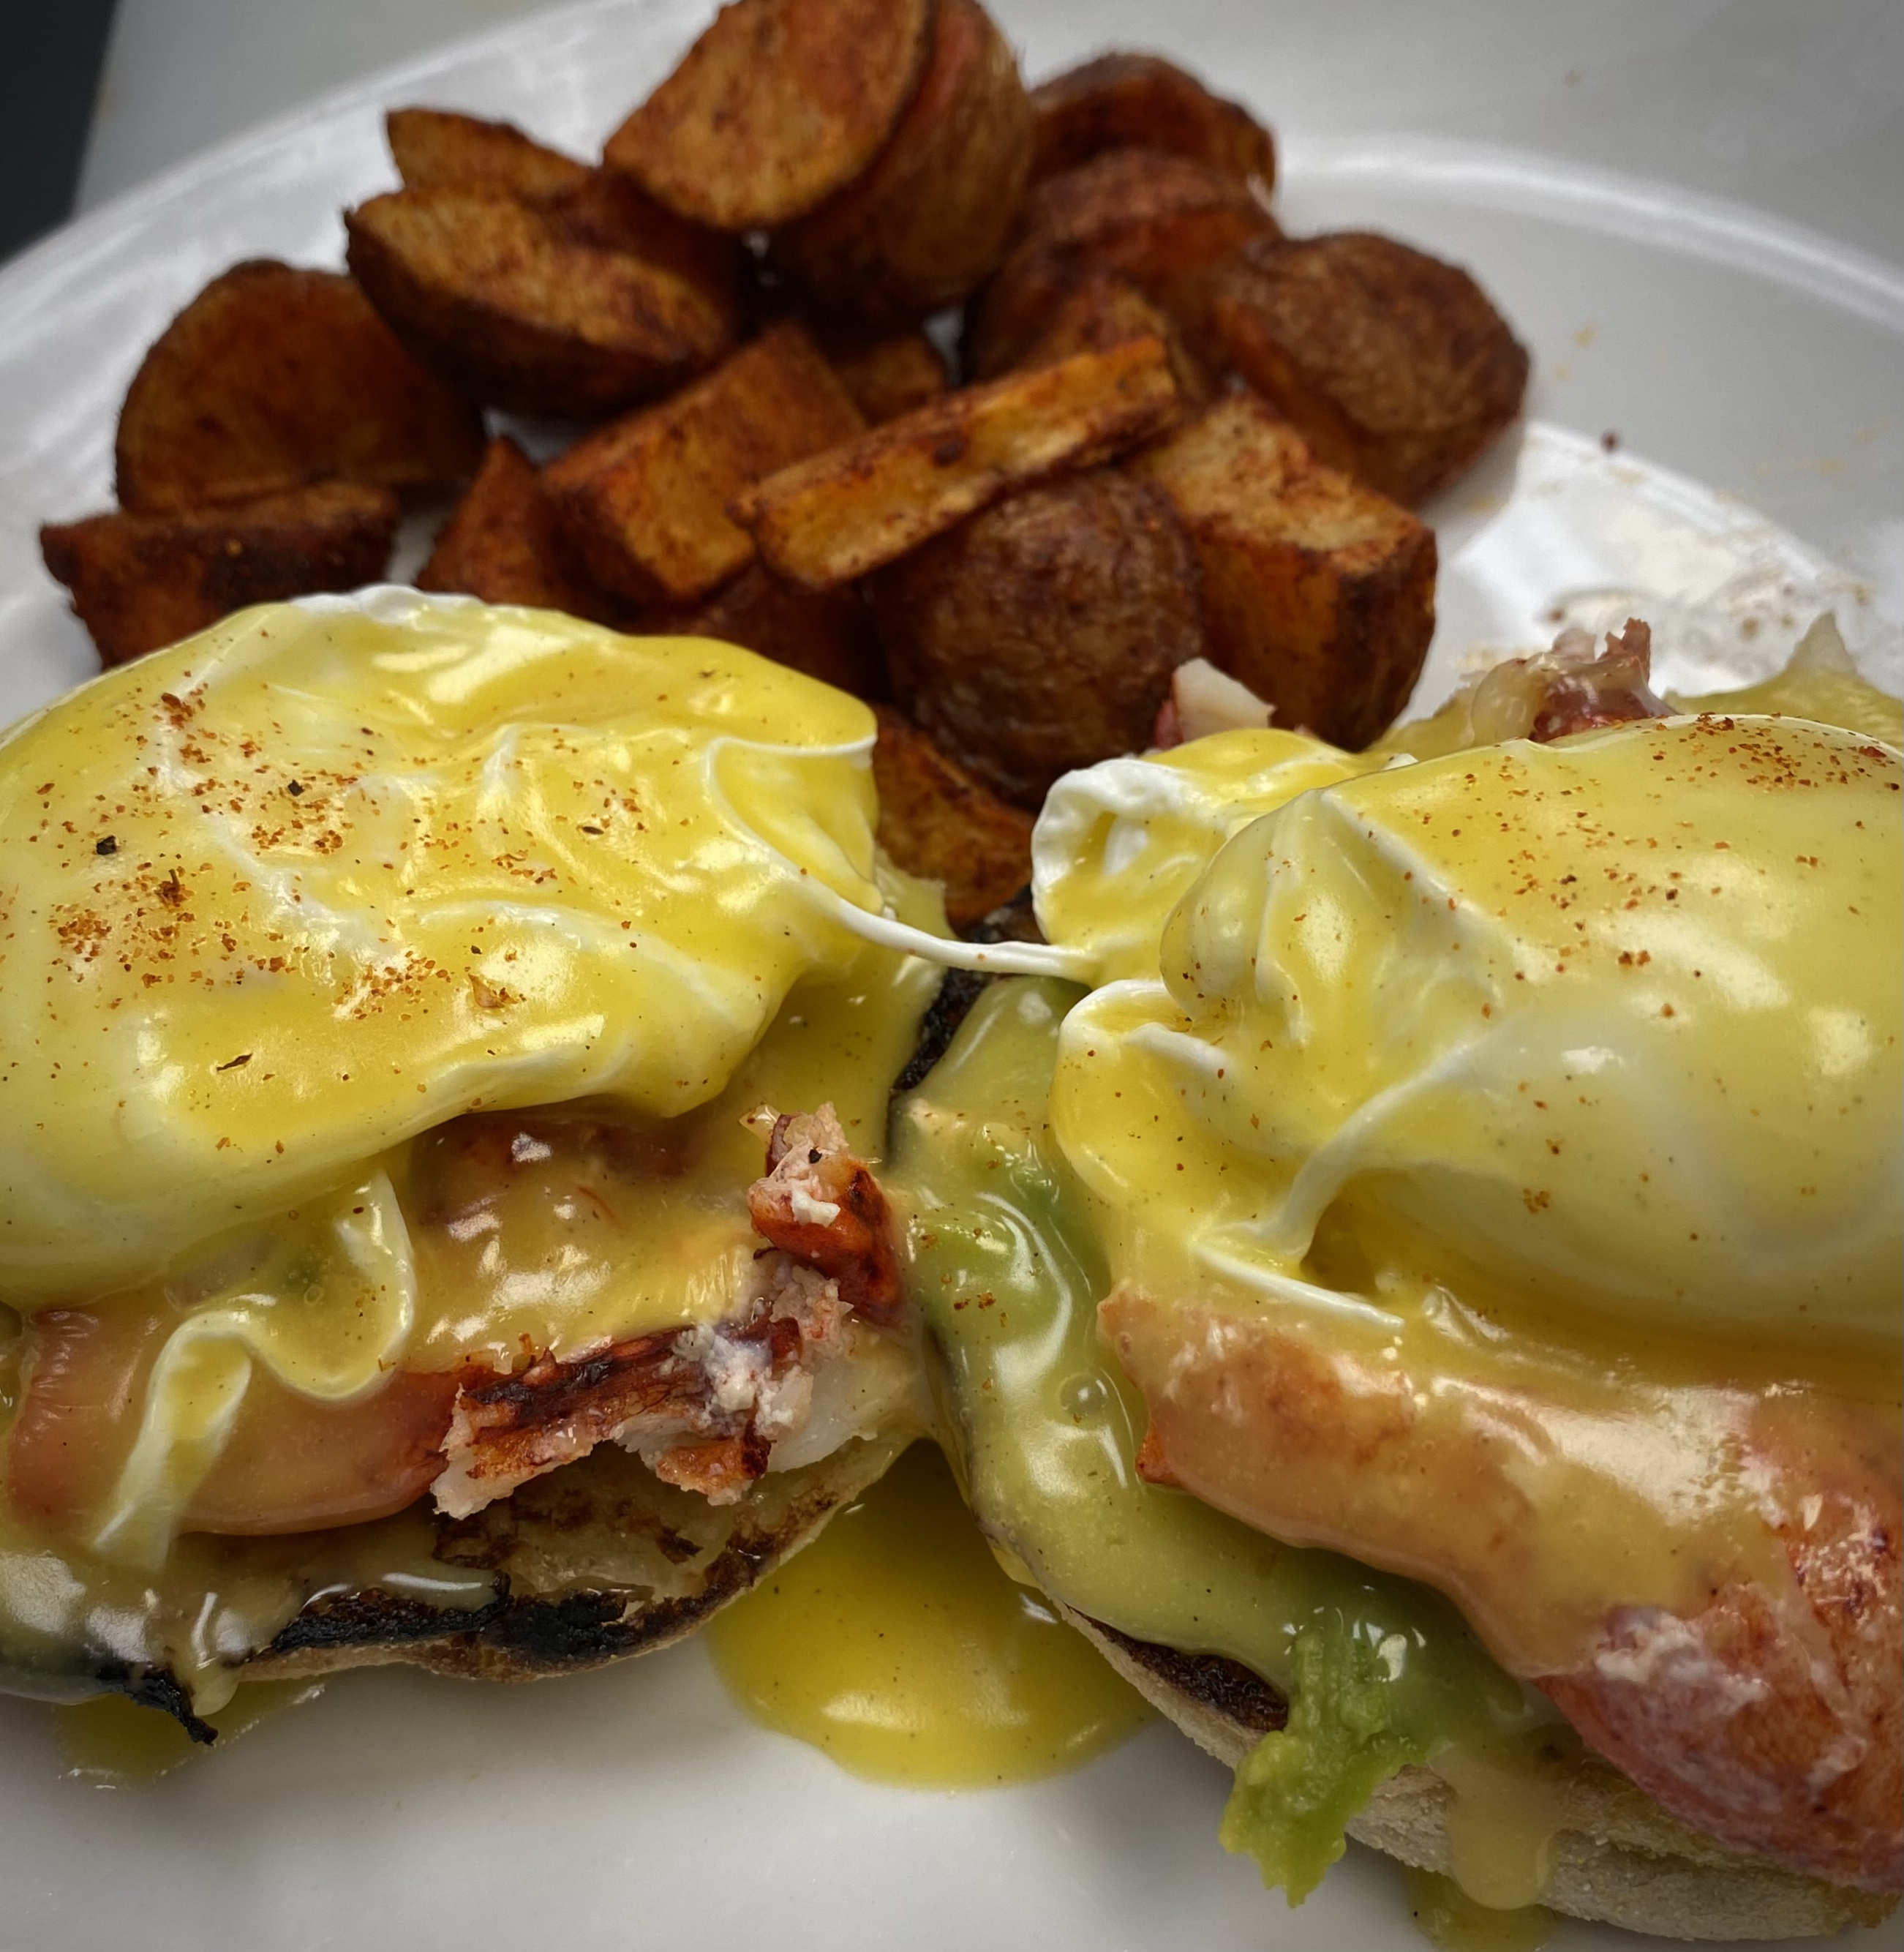 A picture of our lobster benedict with home fries.